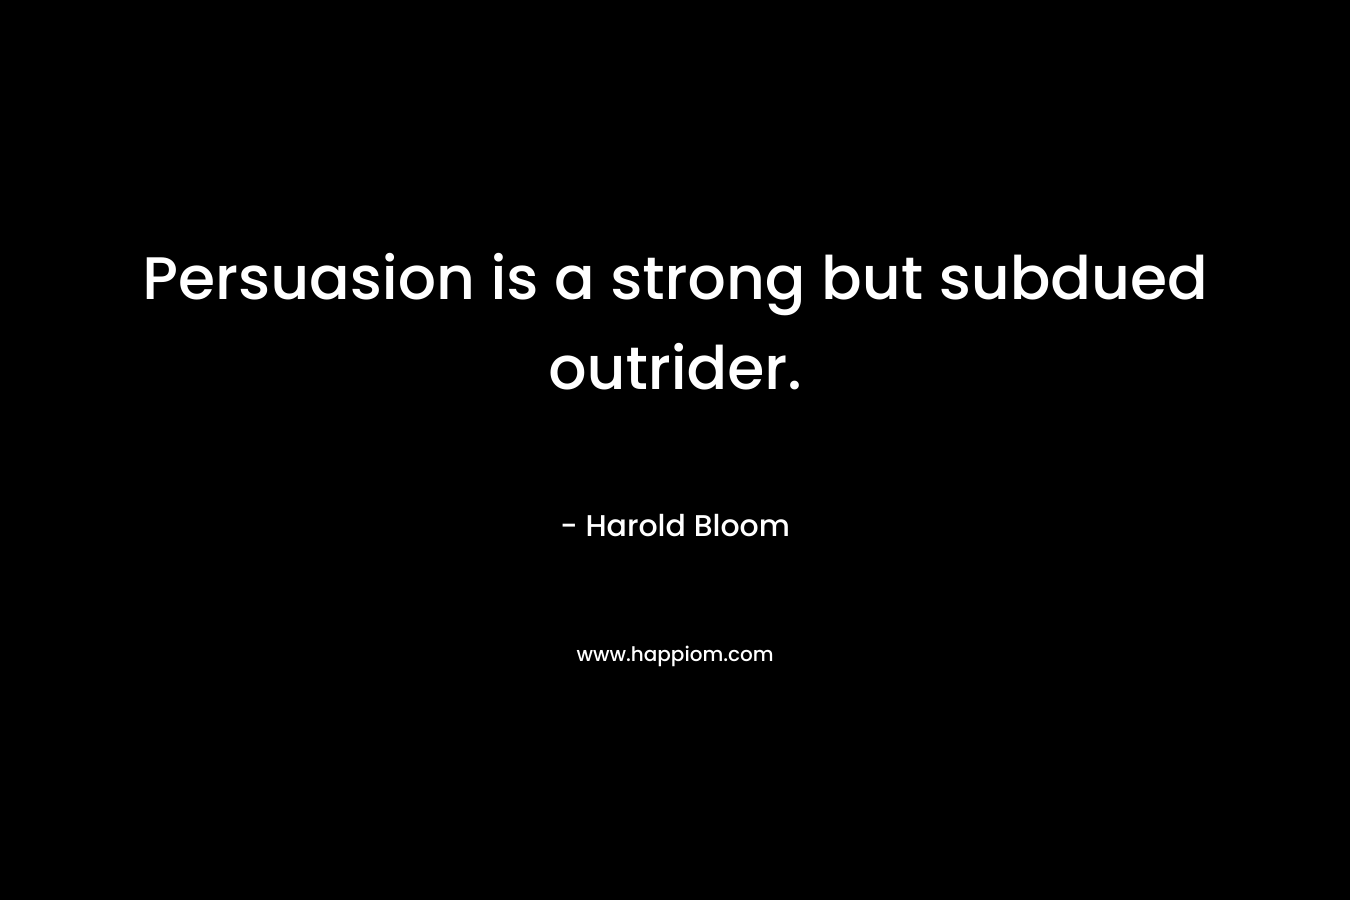 Persuasion is a strong but subdued outrider. – Harold Bloom